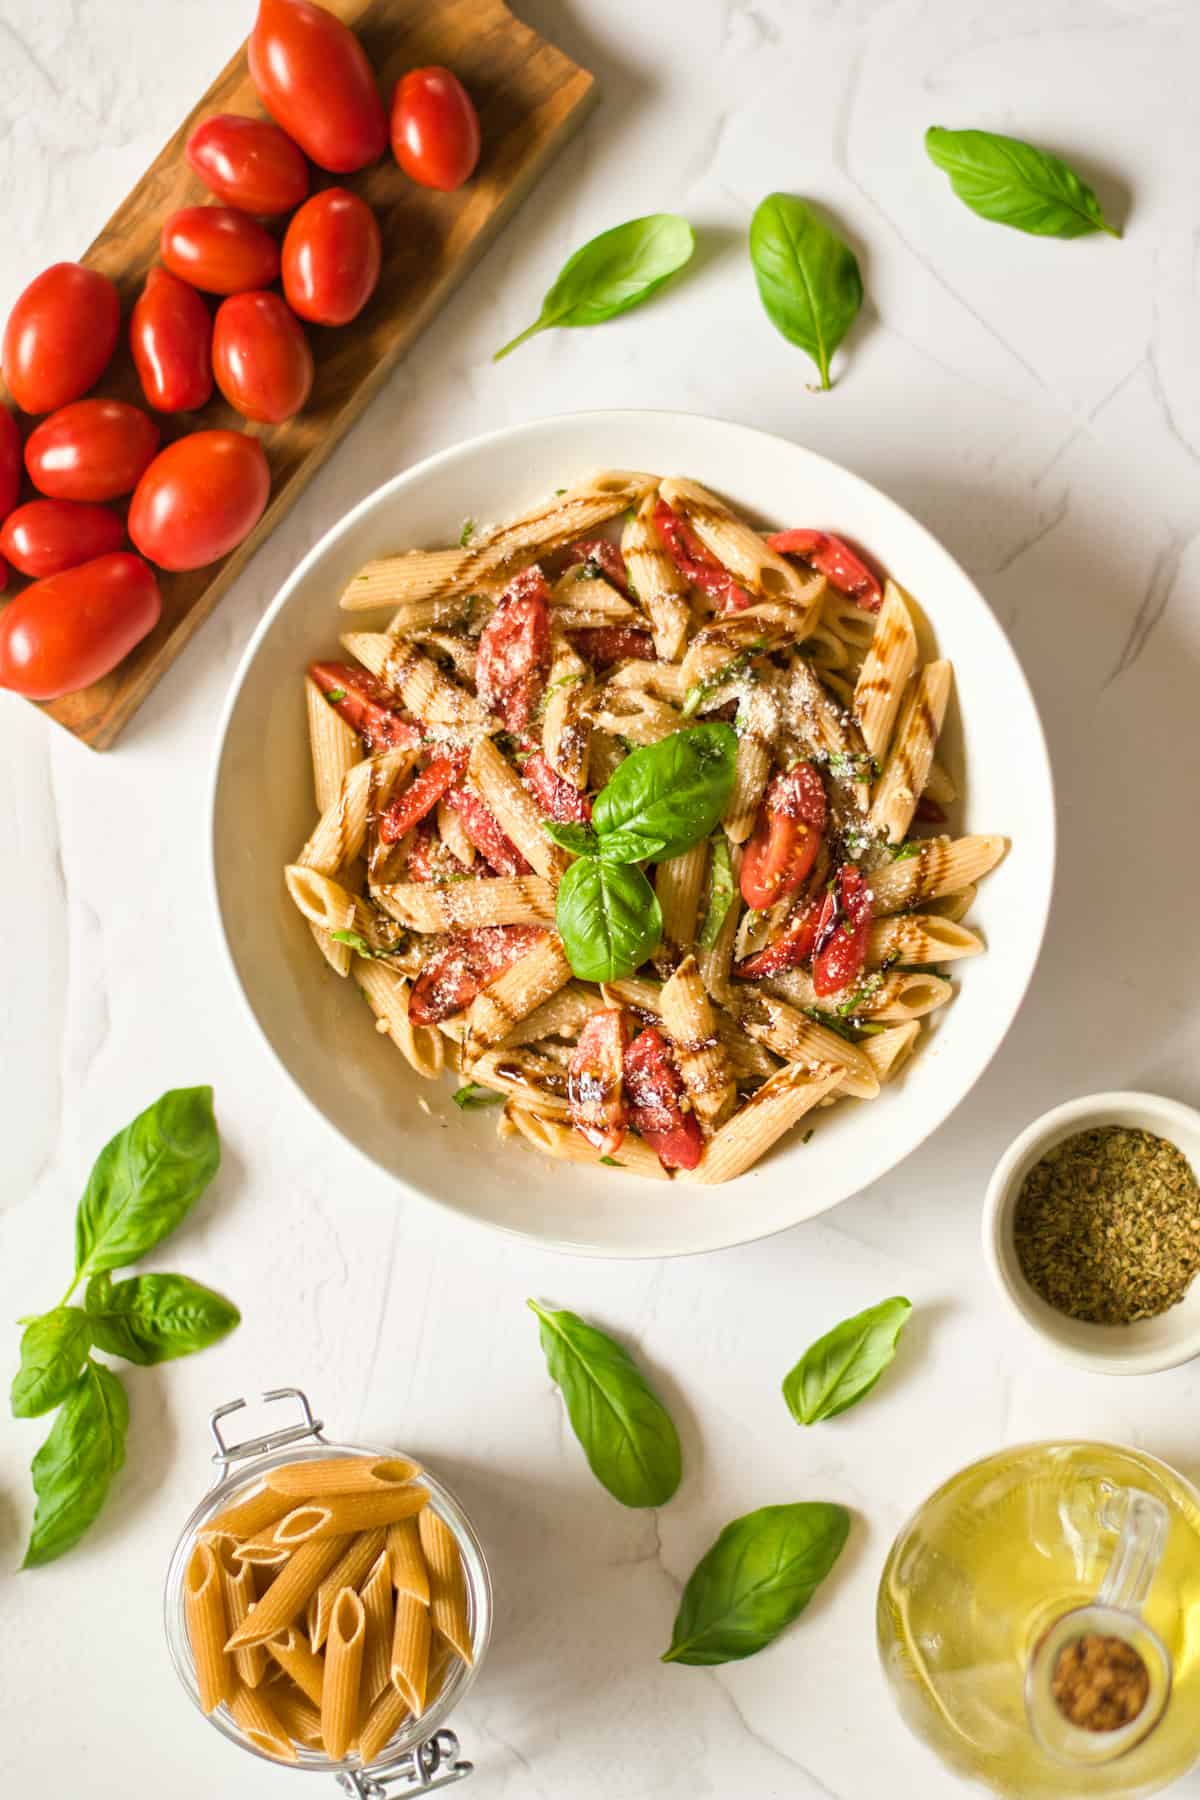 Pasta with tomatoes and basil in a white bowl on dinner table with bottle of oil, jar of pasta, basil leaves, seasoning, and tomatoes.